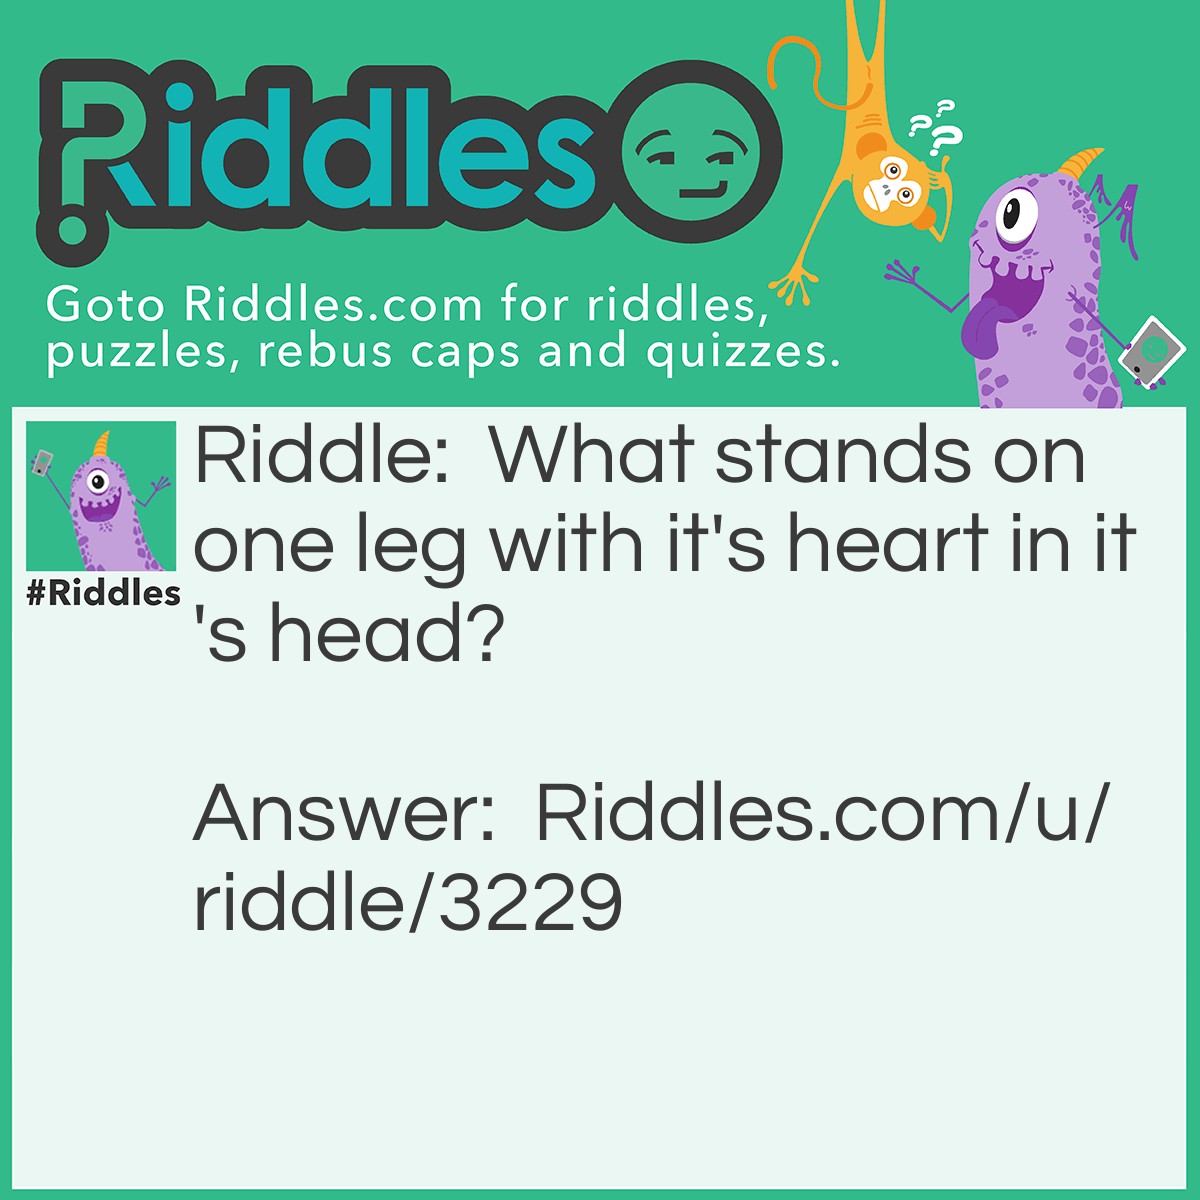 Riddle: What stands on one leg with it's heart in it's head? Answer: A cabbage.